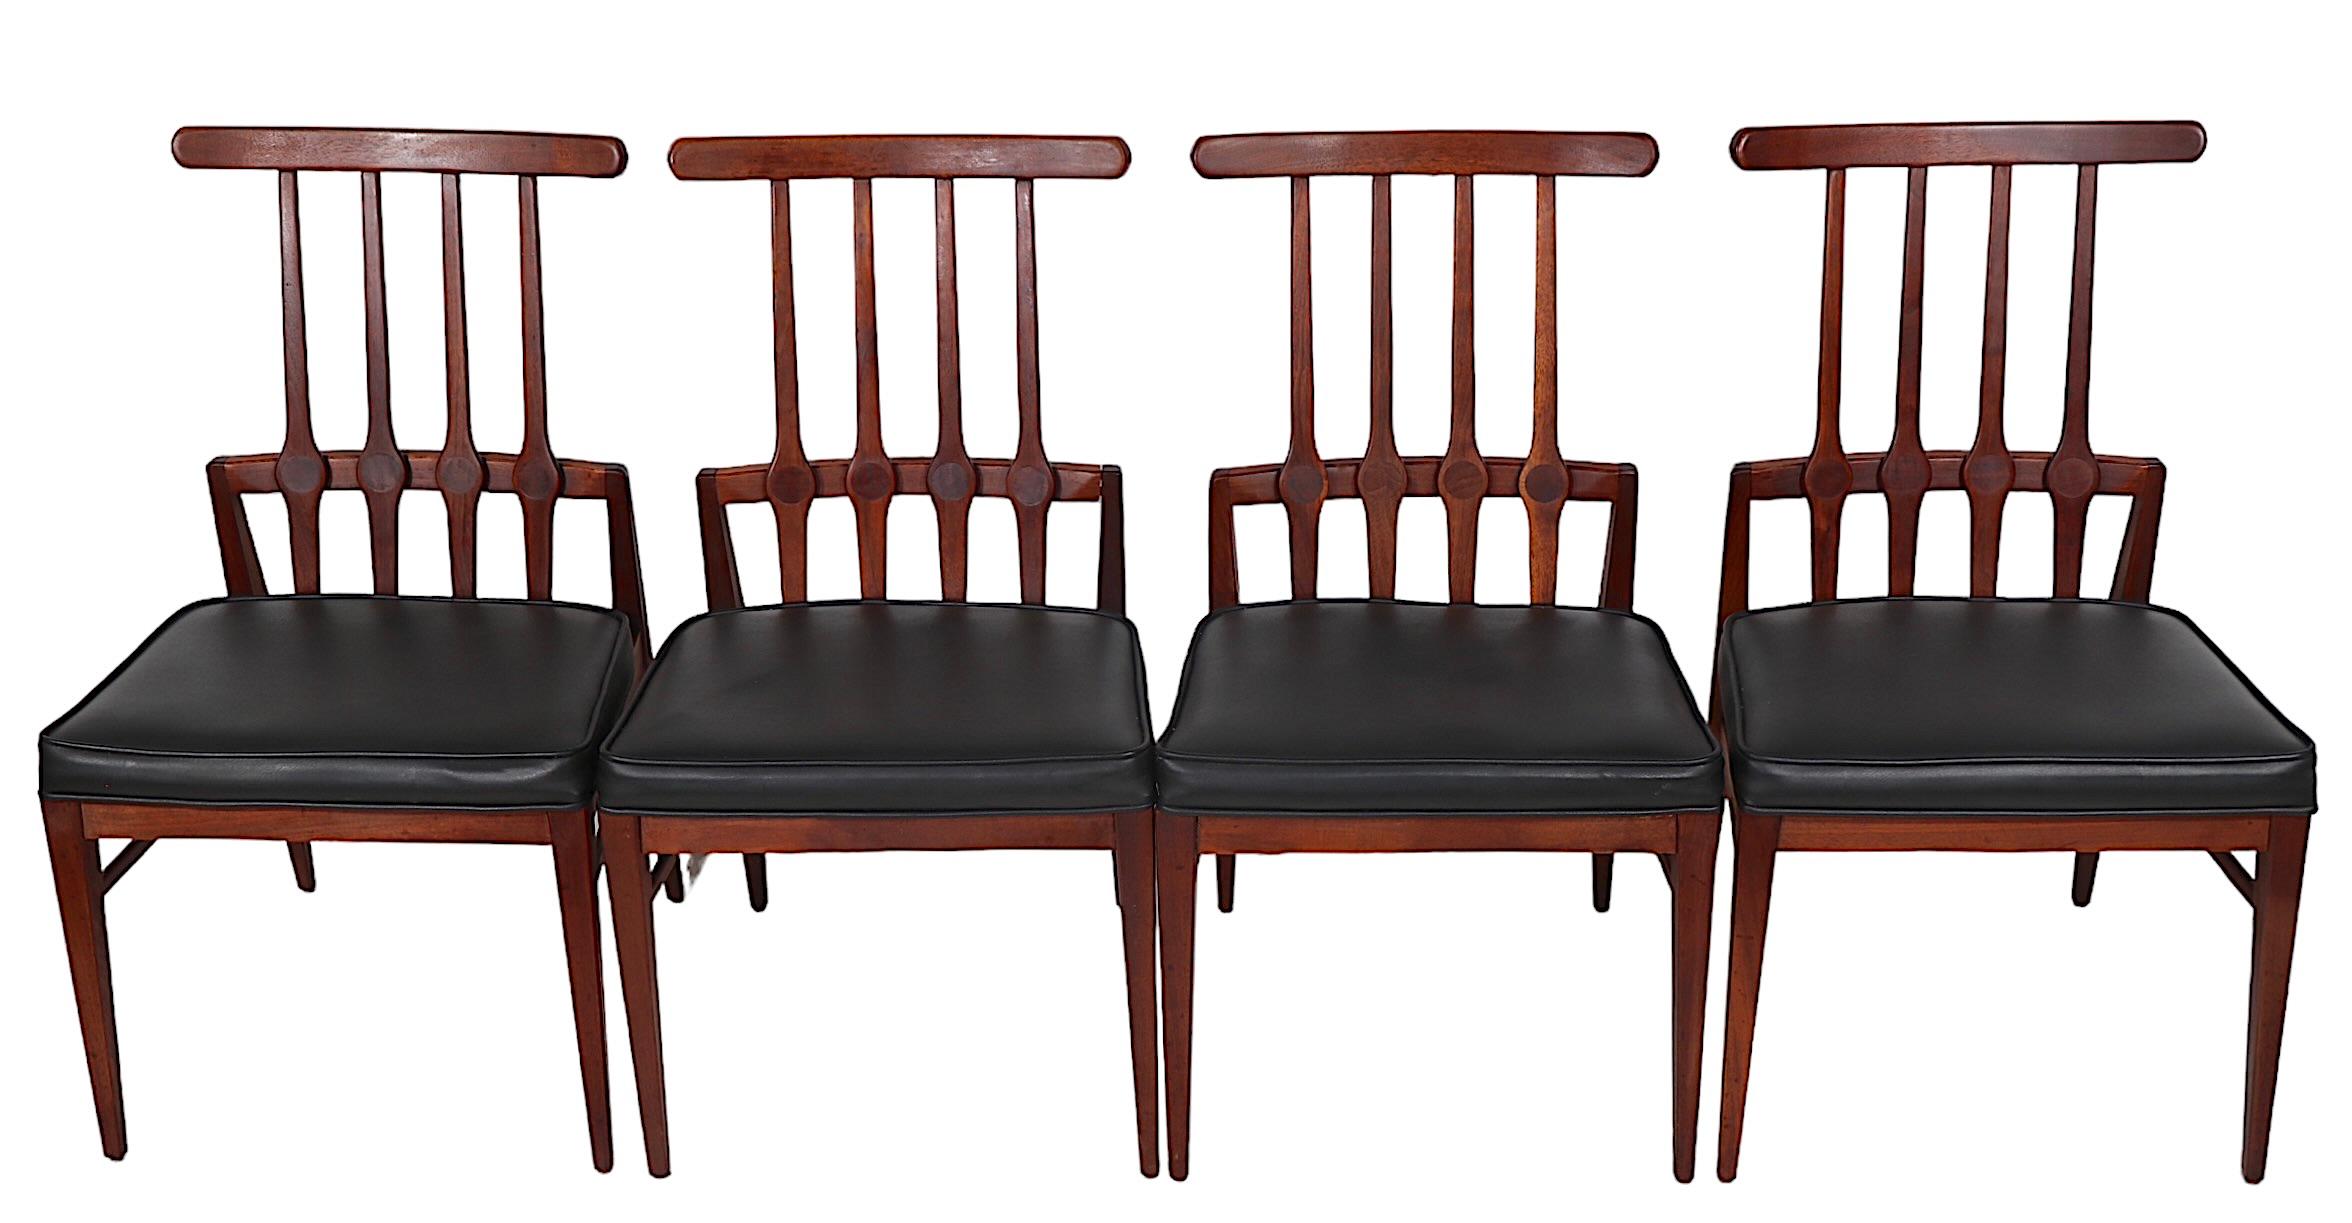 Set of Four Mid Century Dining Chairs by Foster - McDavid c 1950/1960's  For Sale 3